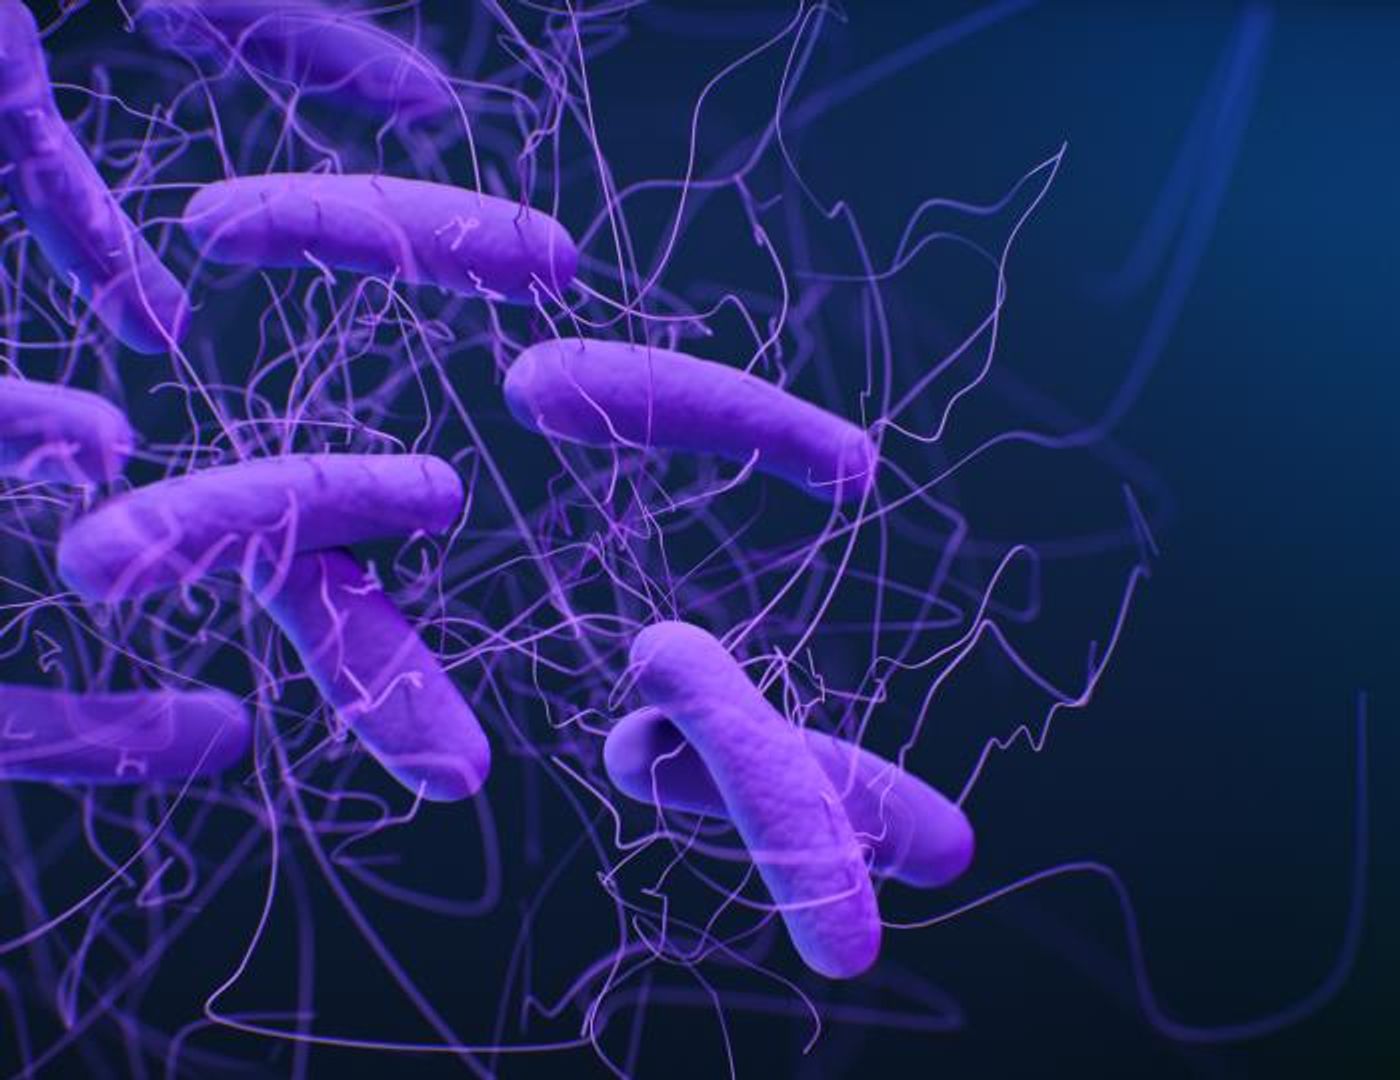 A medical illustration of Clostridioides difficile bacteria, formerly known as Clostridium difficile / Credit: CDC/ Antibiotic Resistance Coordination and Strategy Unit / Medical Illustrator: Jennifer Oosthuizen